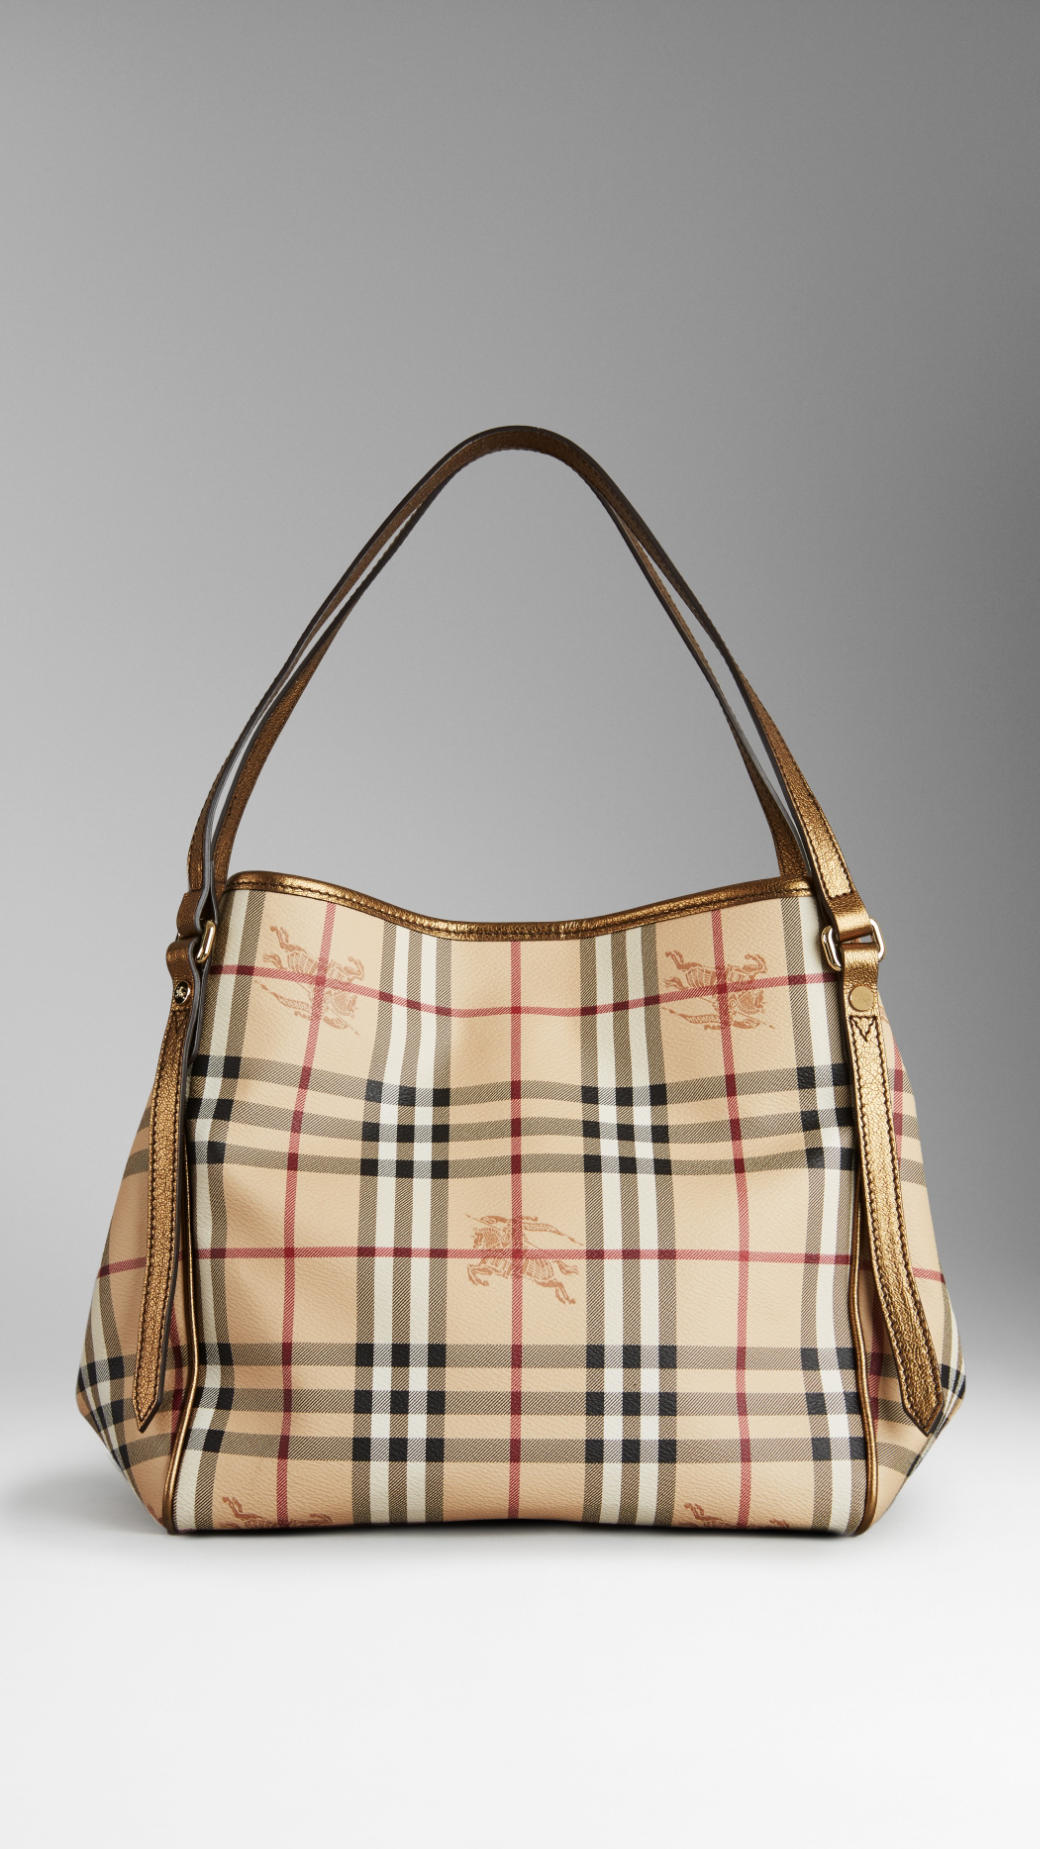 Burberry Canvas Small Haymarket Check Tote Bag in Gold (Brown) - Lyst